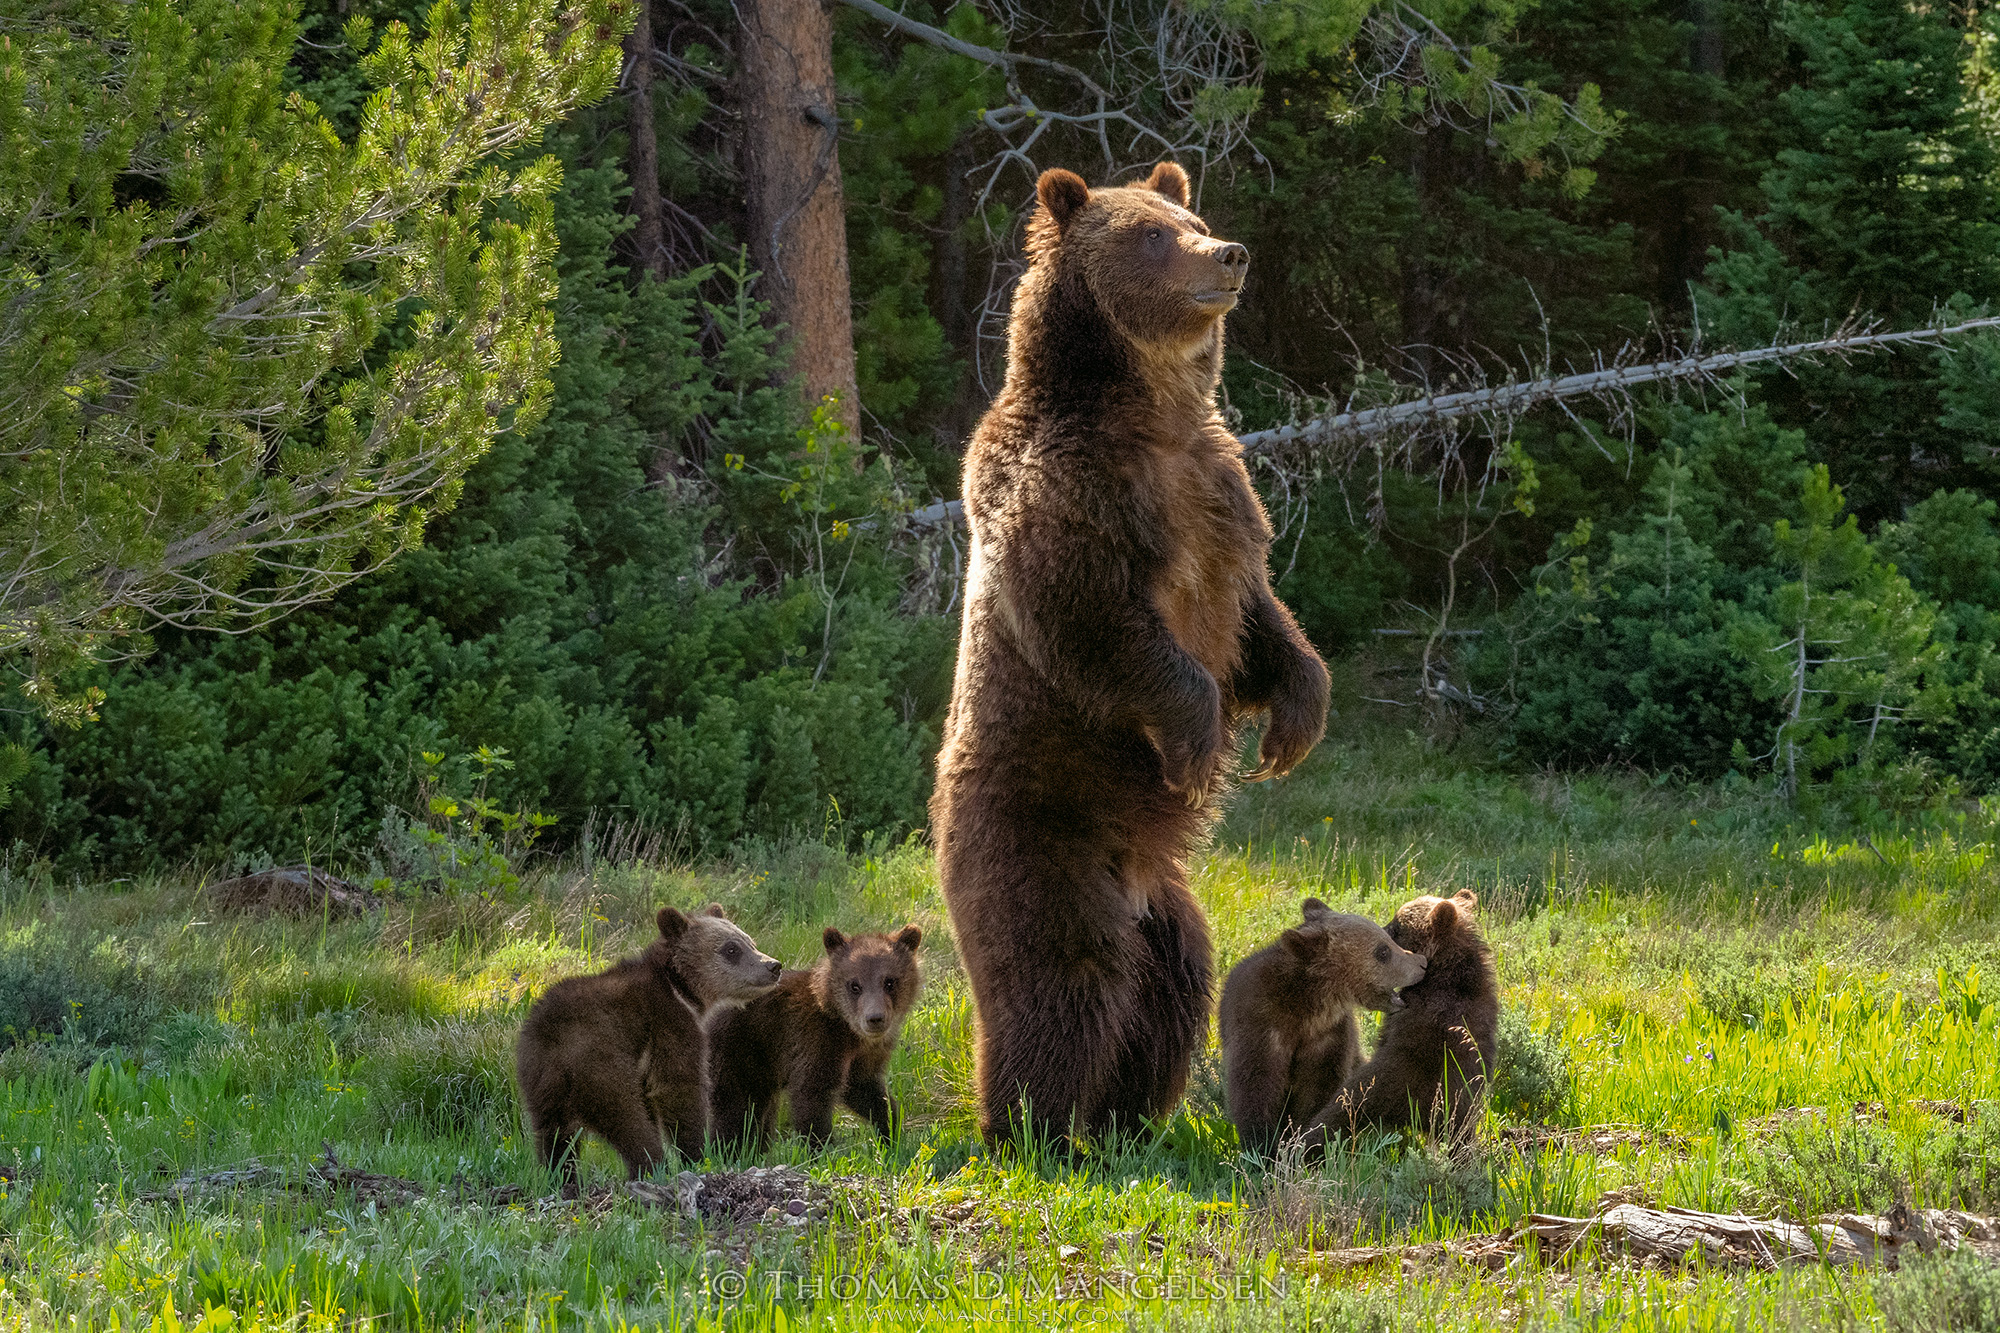 Grizzly Bear 399 stands up on her hind legs with her four cubs circled around her.